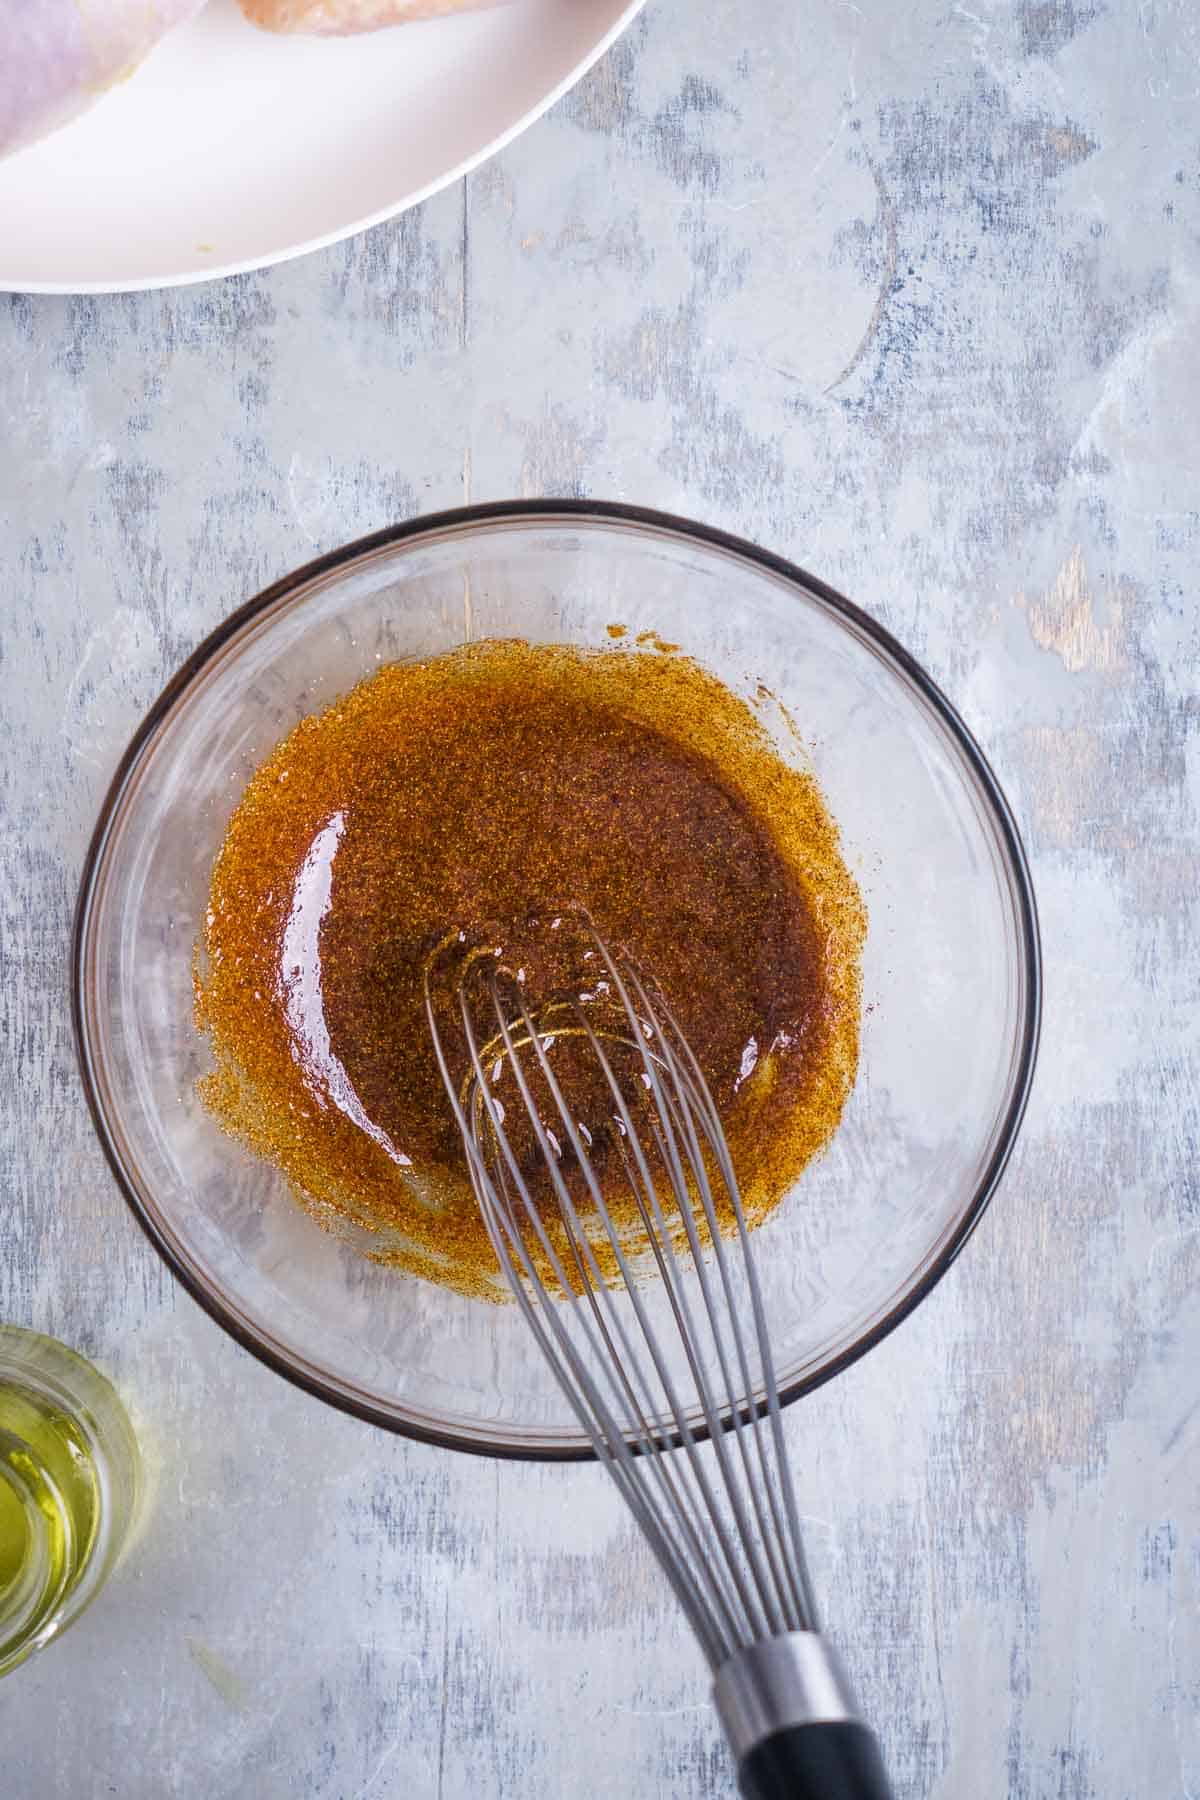 Chicken seasoning is whisked in glass mixing bowl